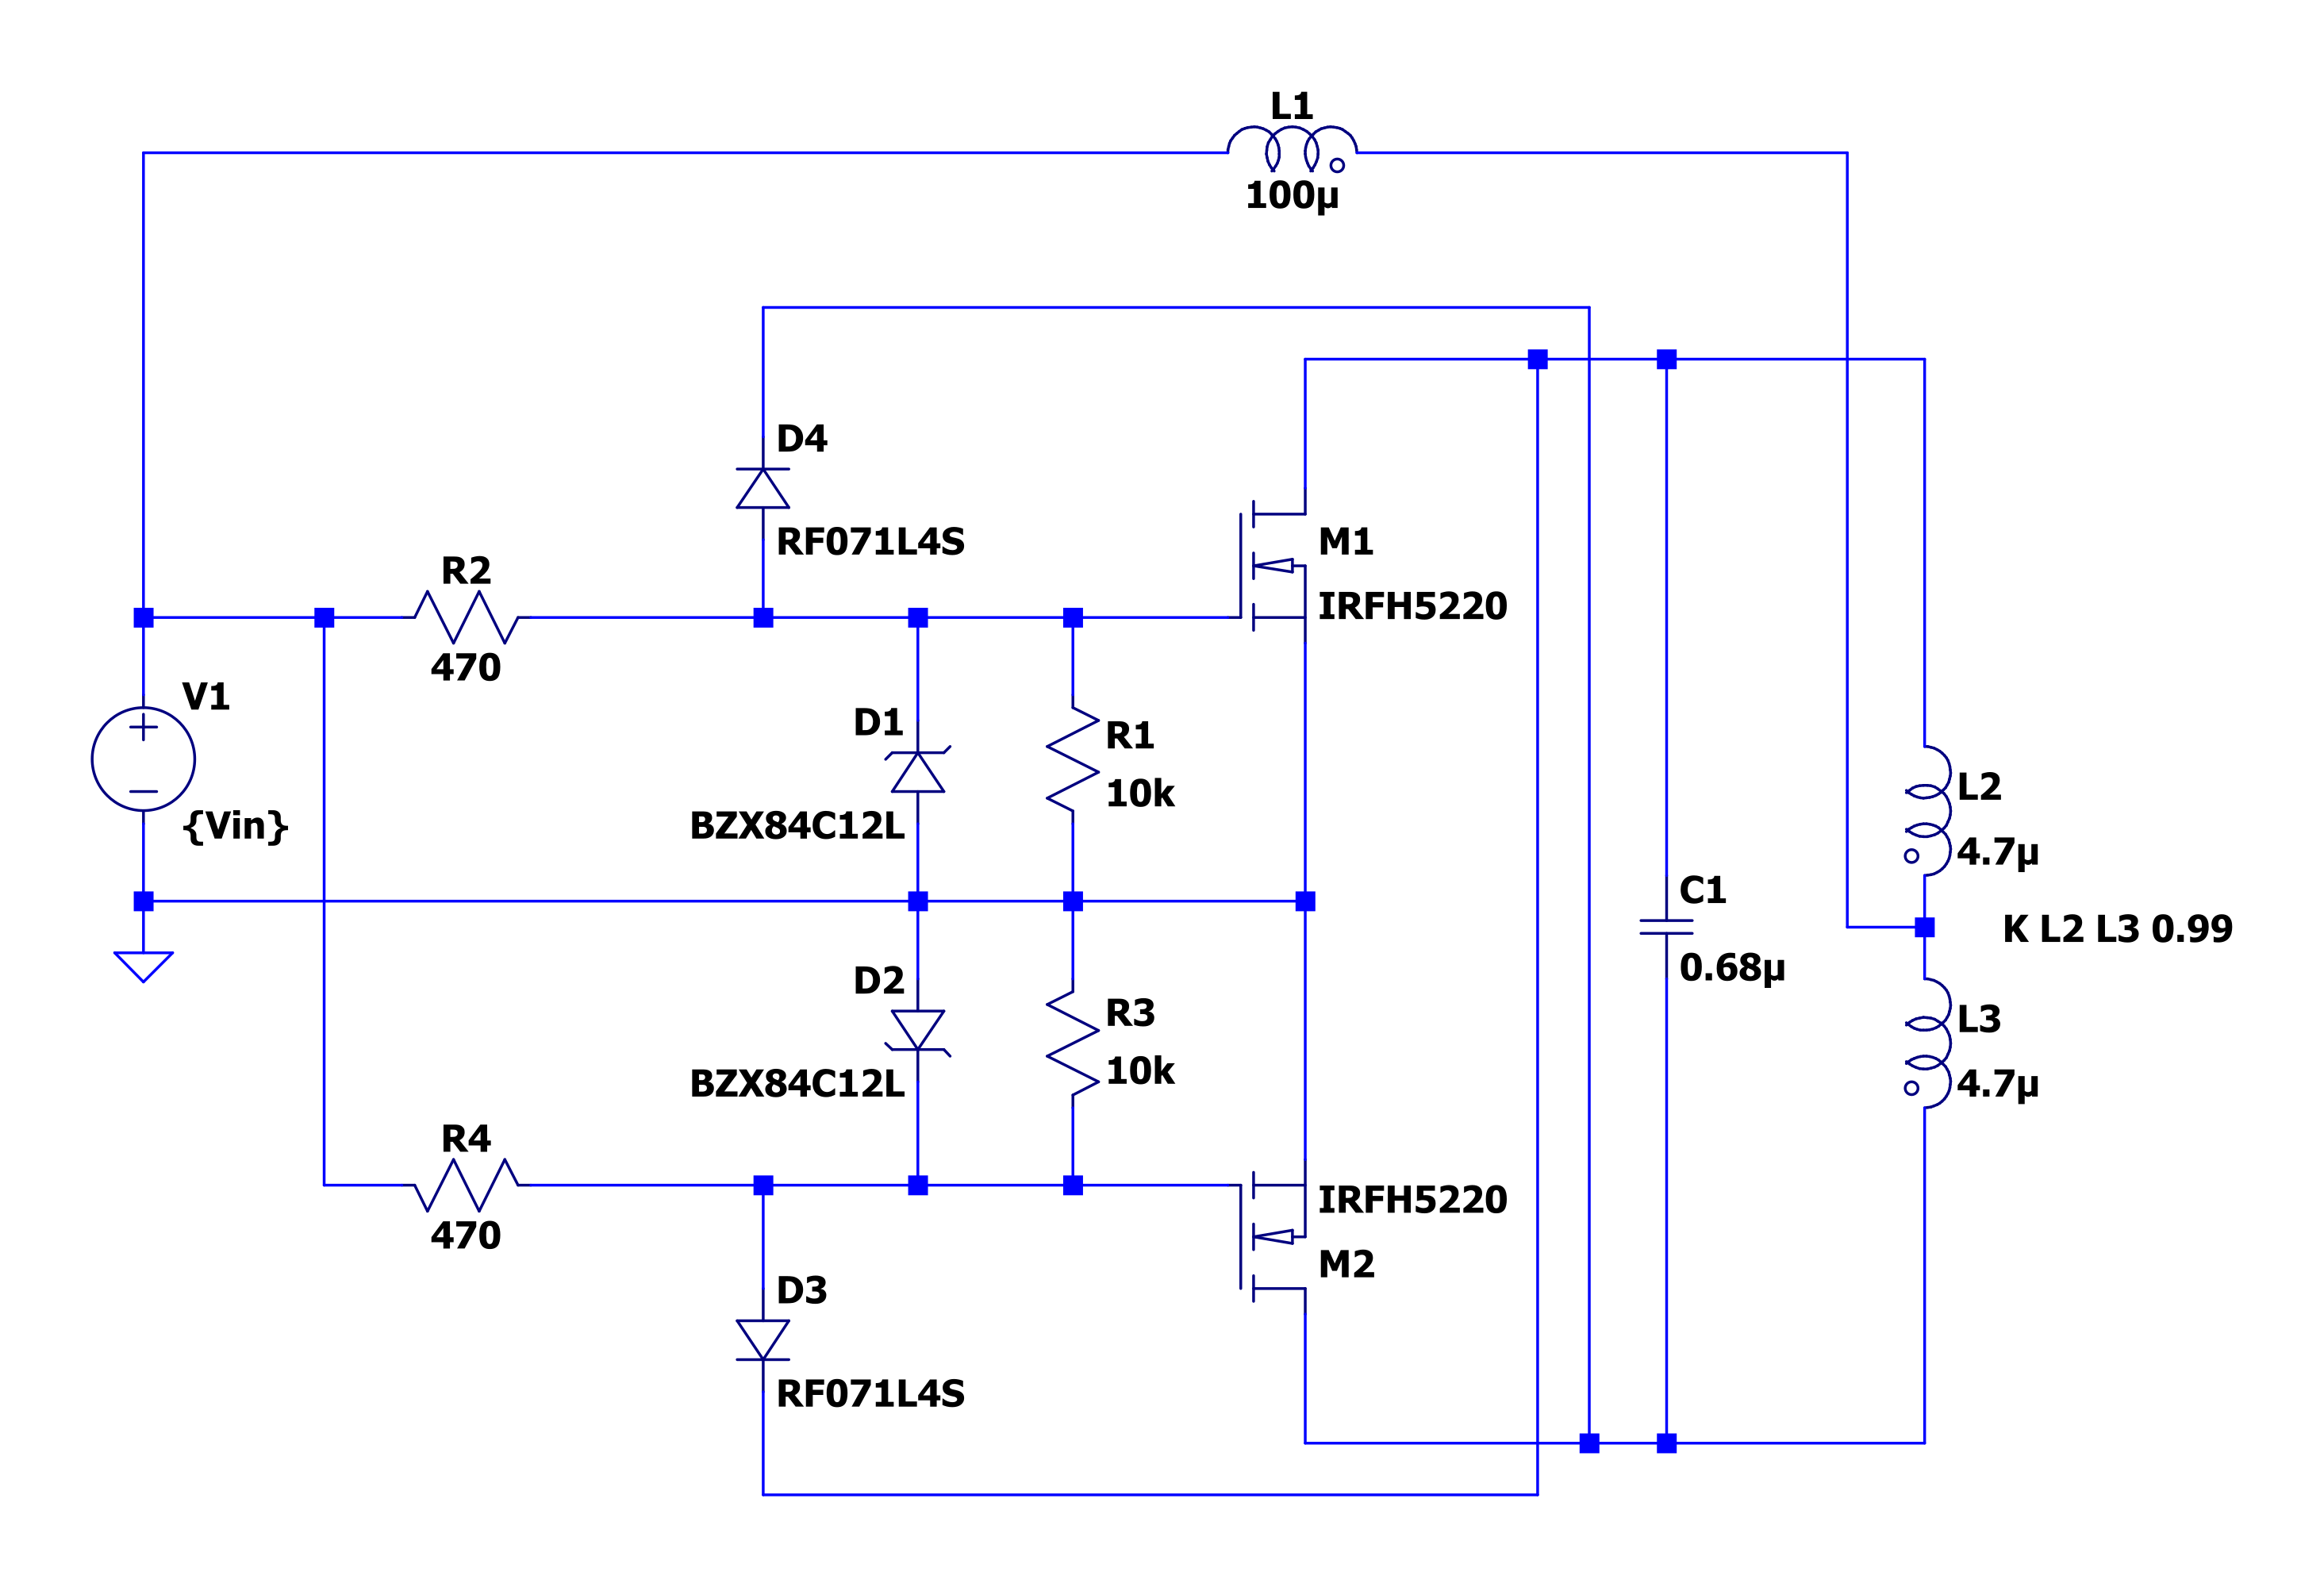 Schematics for the same circuit, but redrawn in LTSpice software.